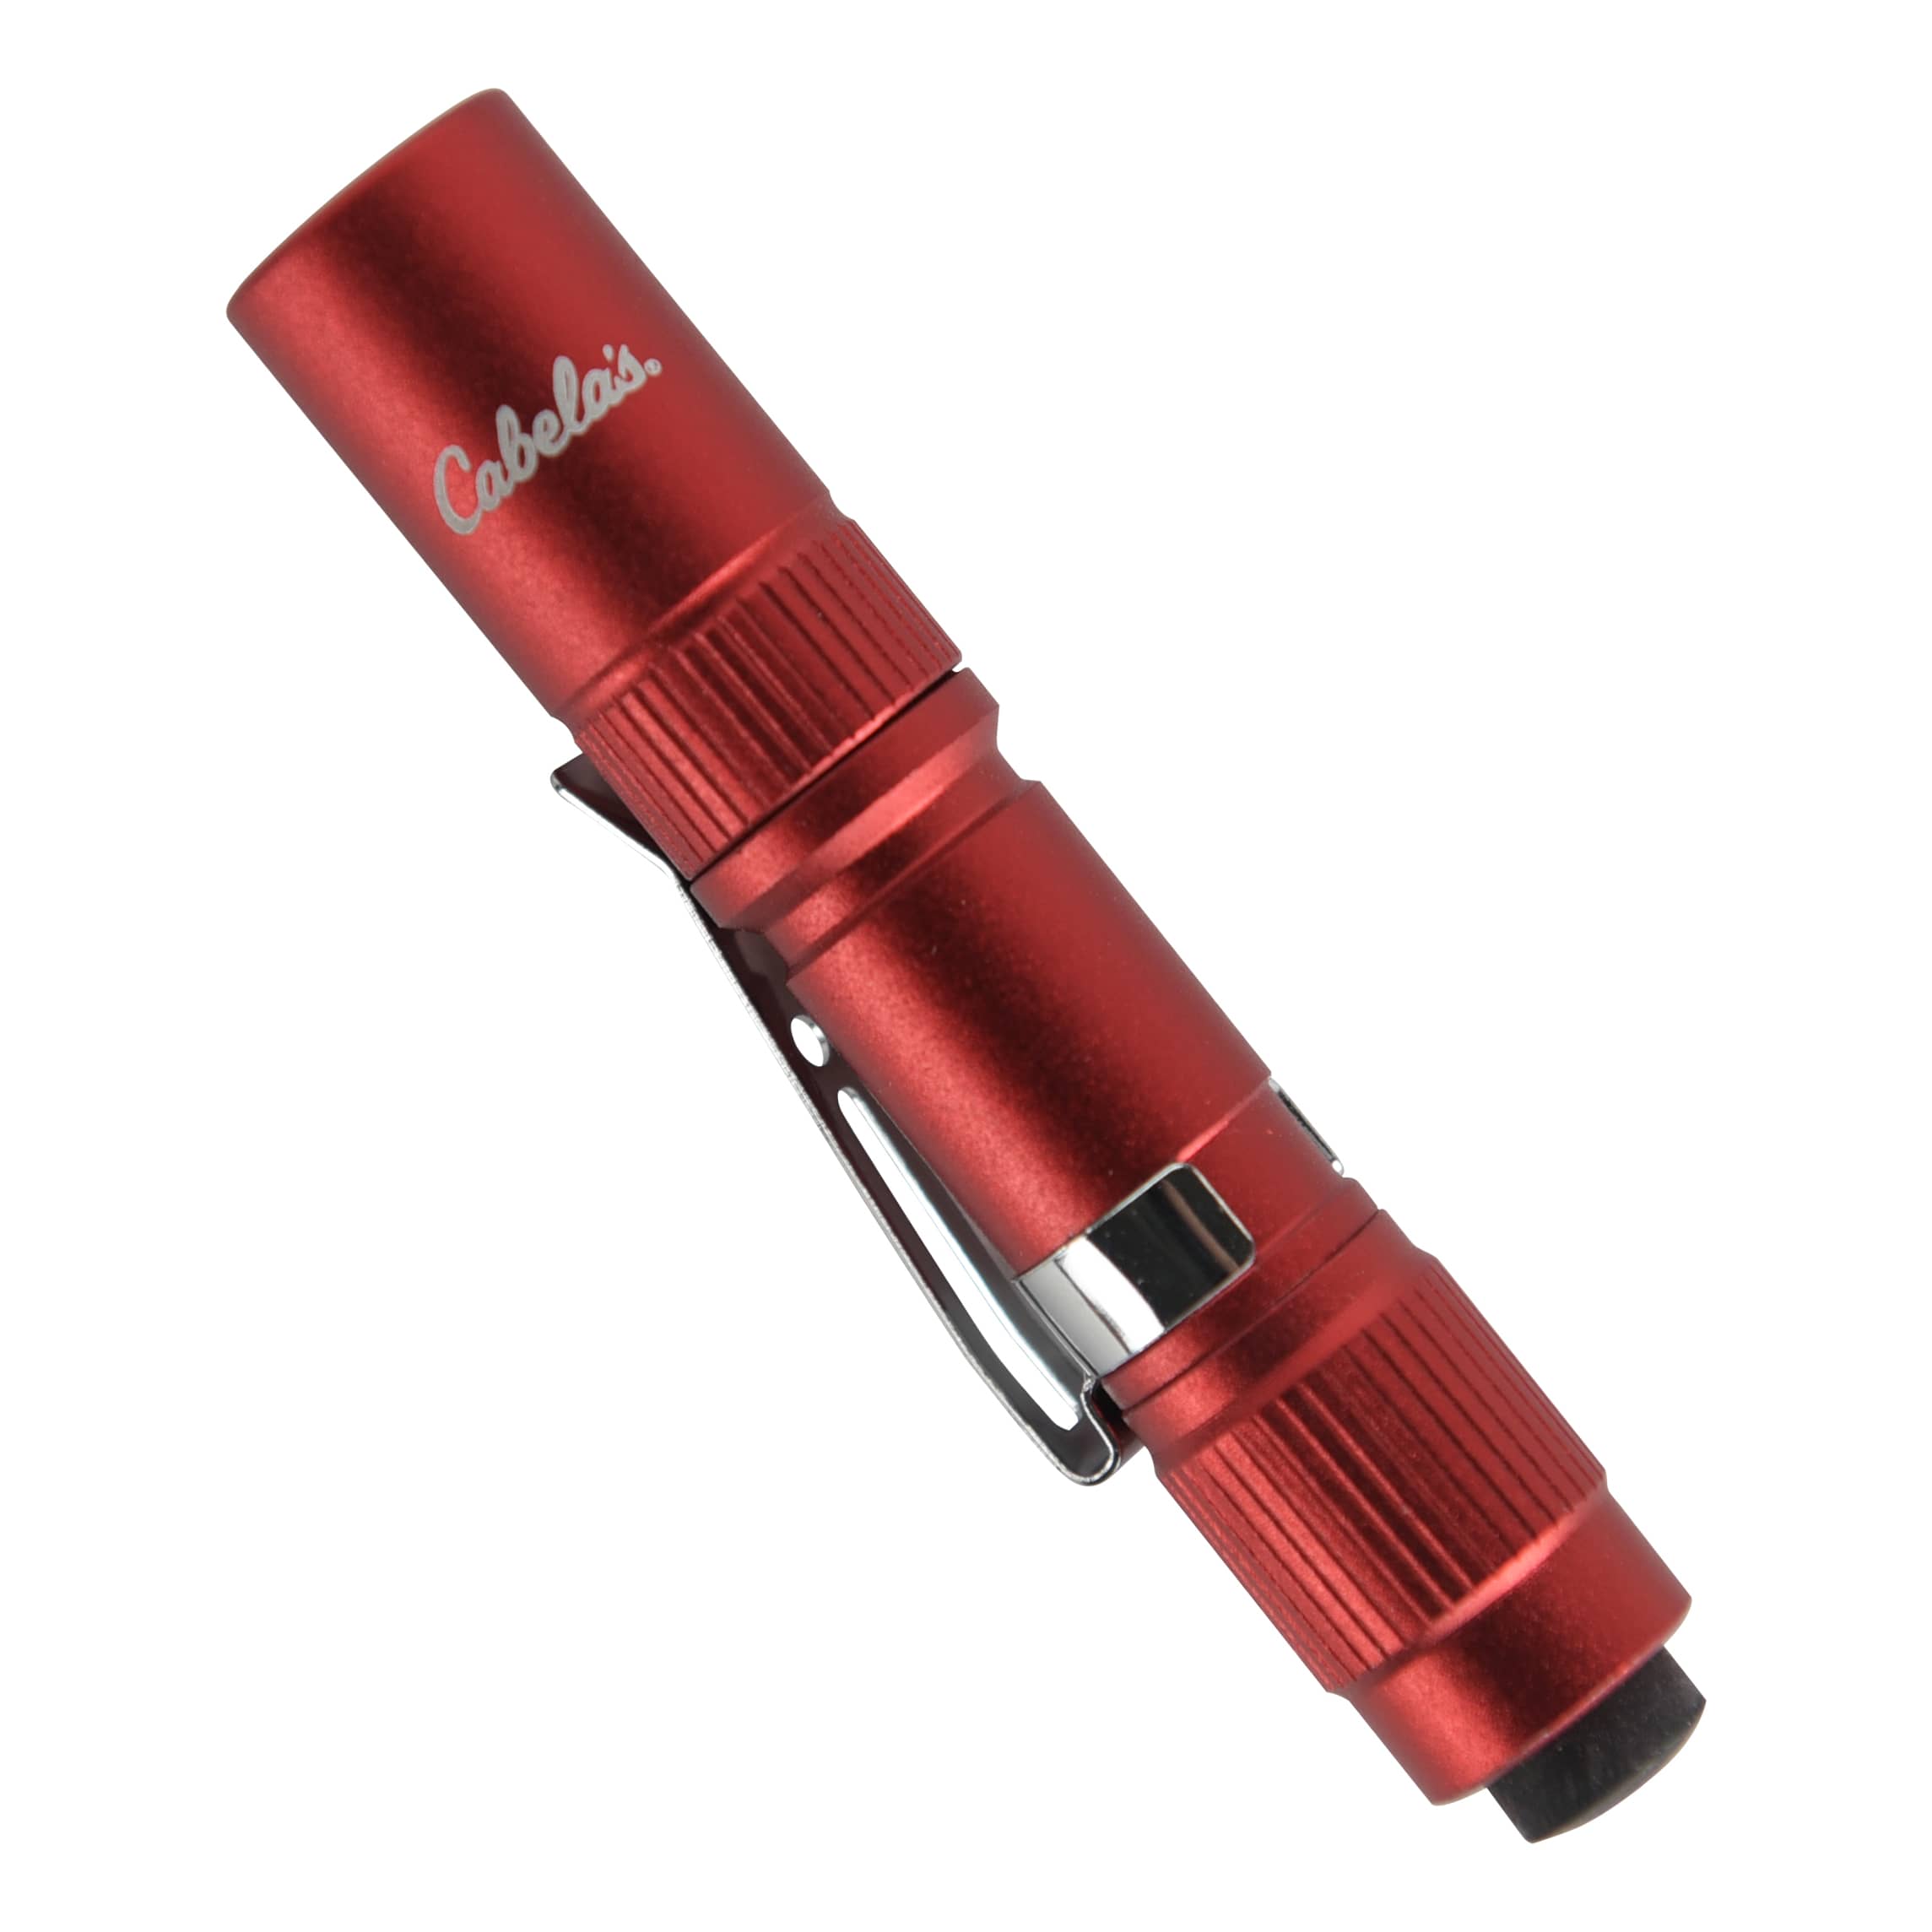 Cabela's Knife and Flashlight Combo with Waterproof Case - Red - Flashlight View